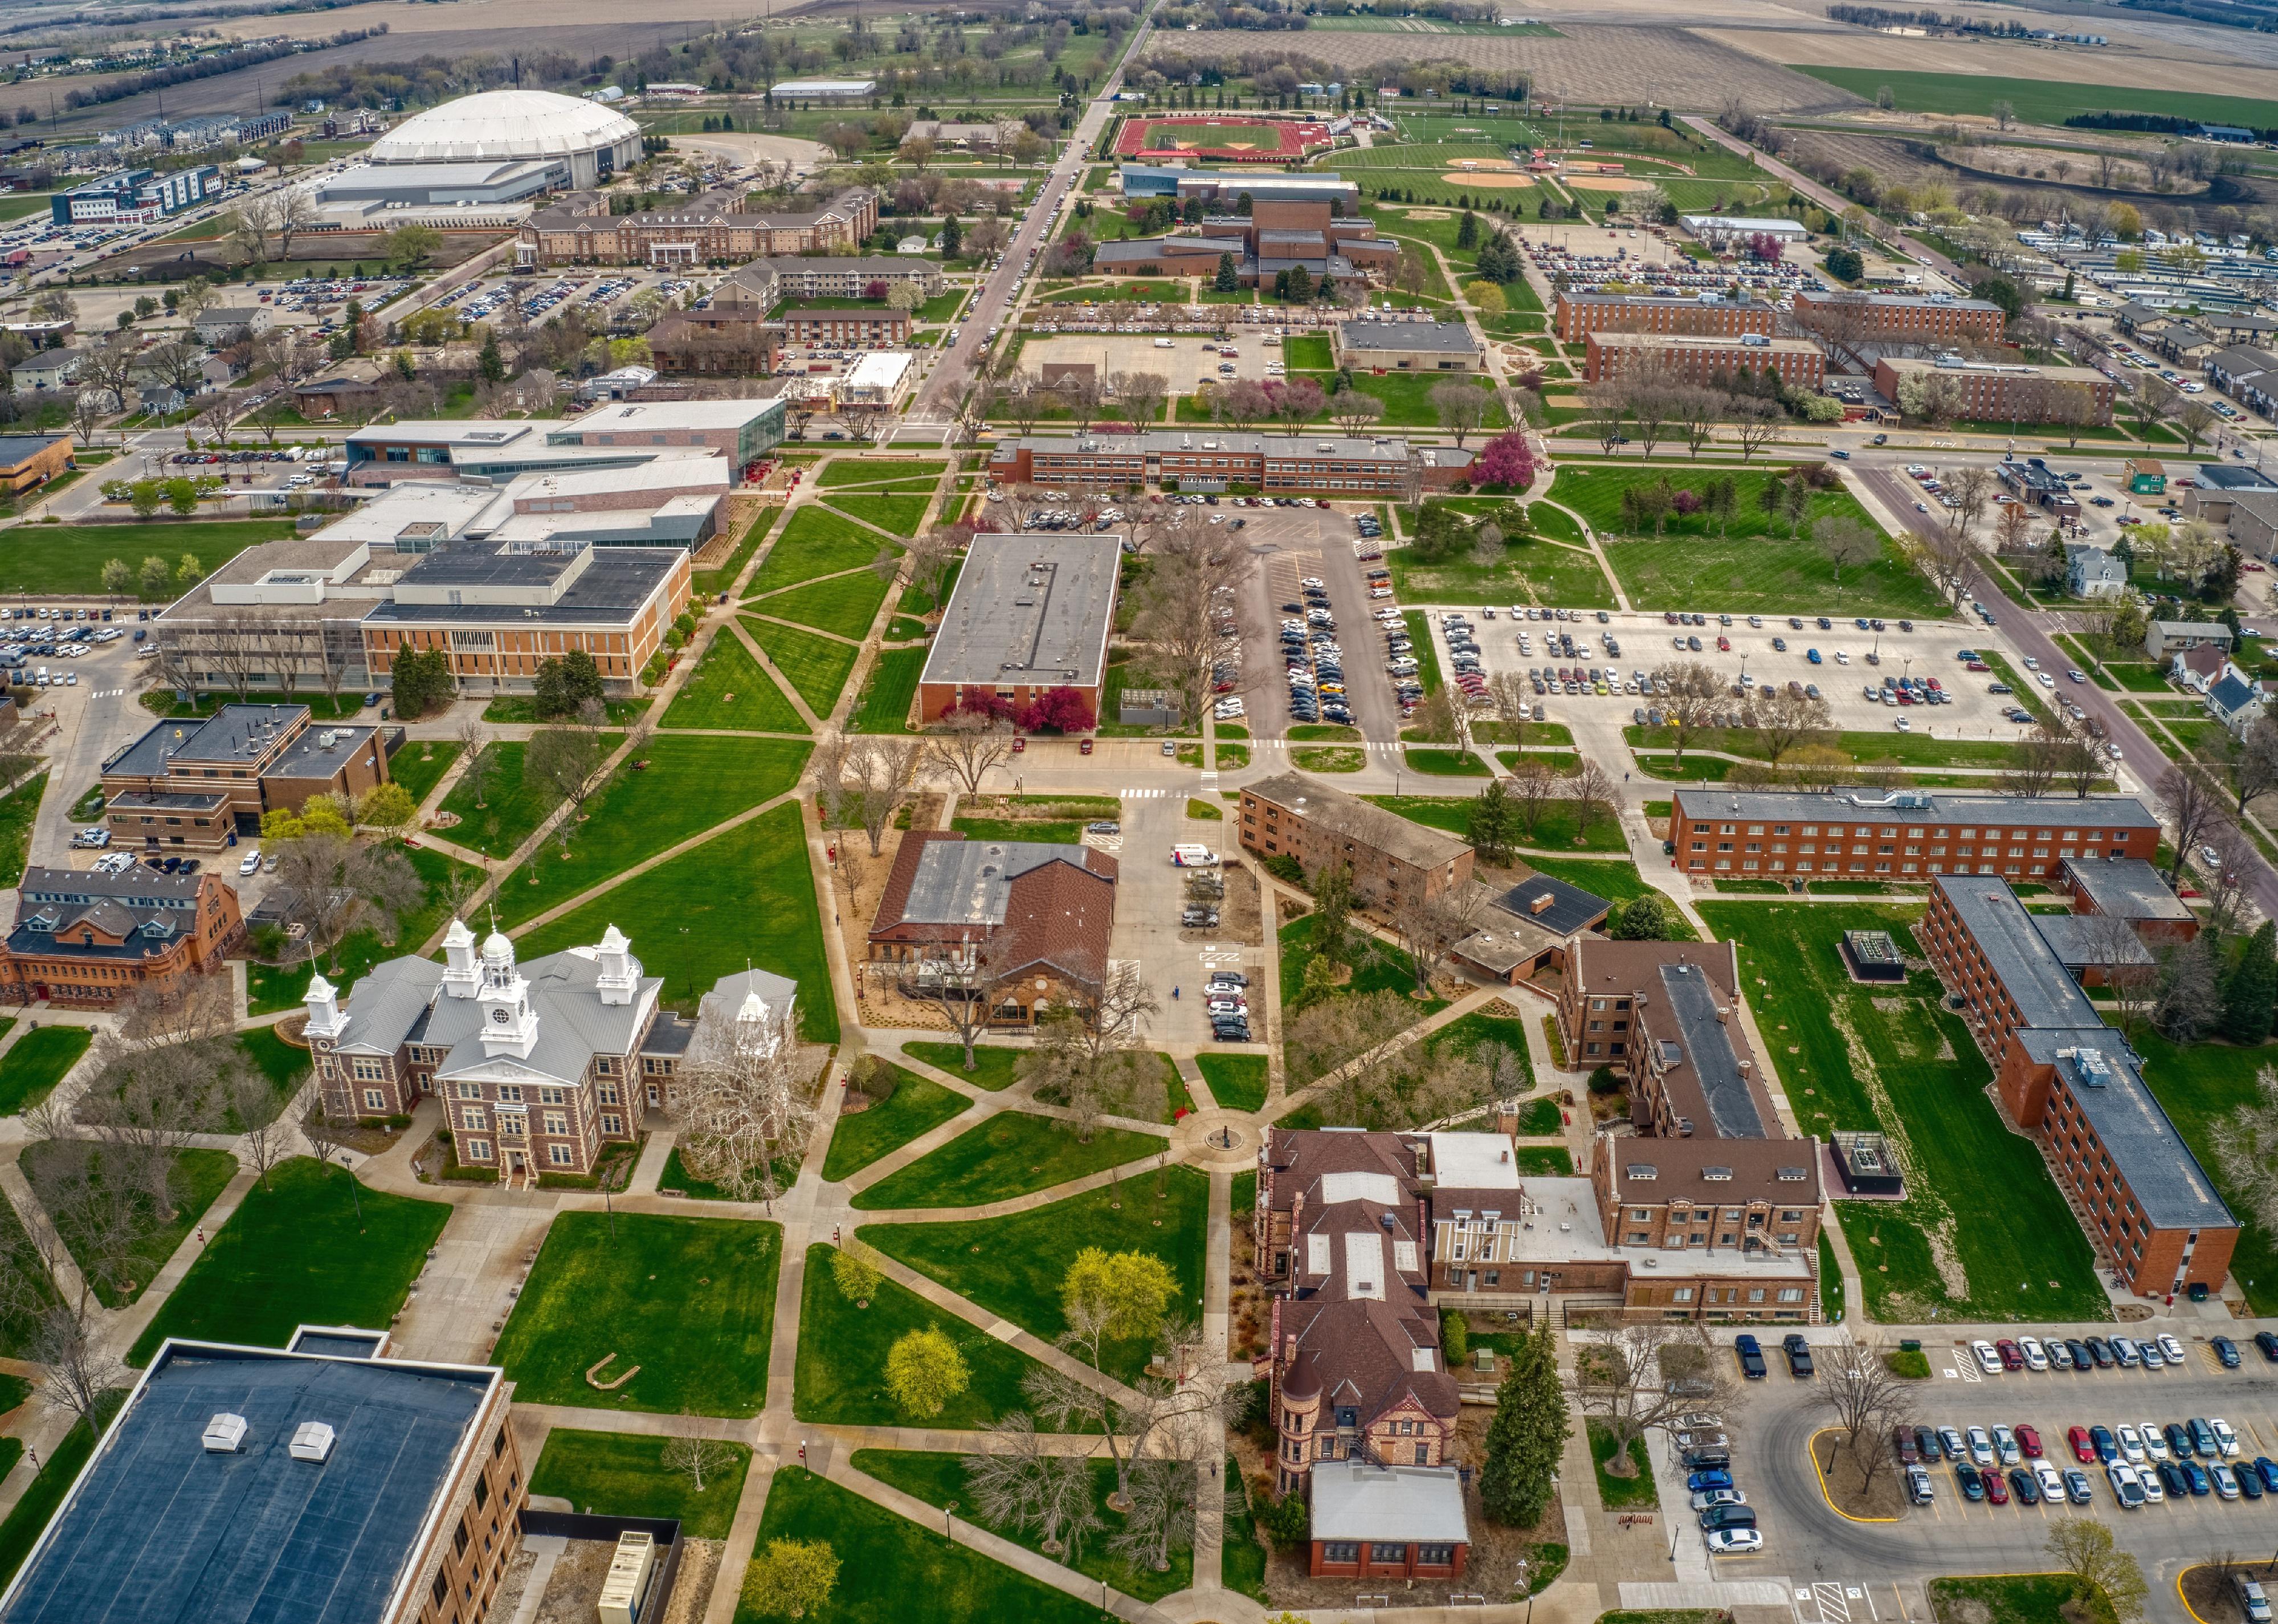 Aerial View of a State University in Vermillion, South Dakota.